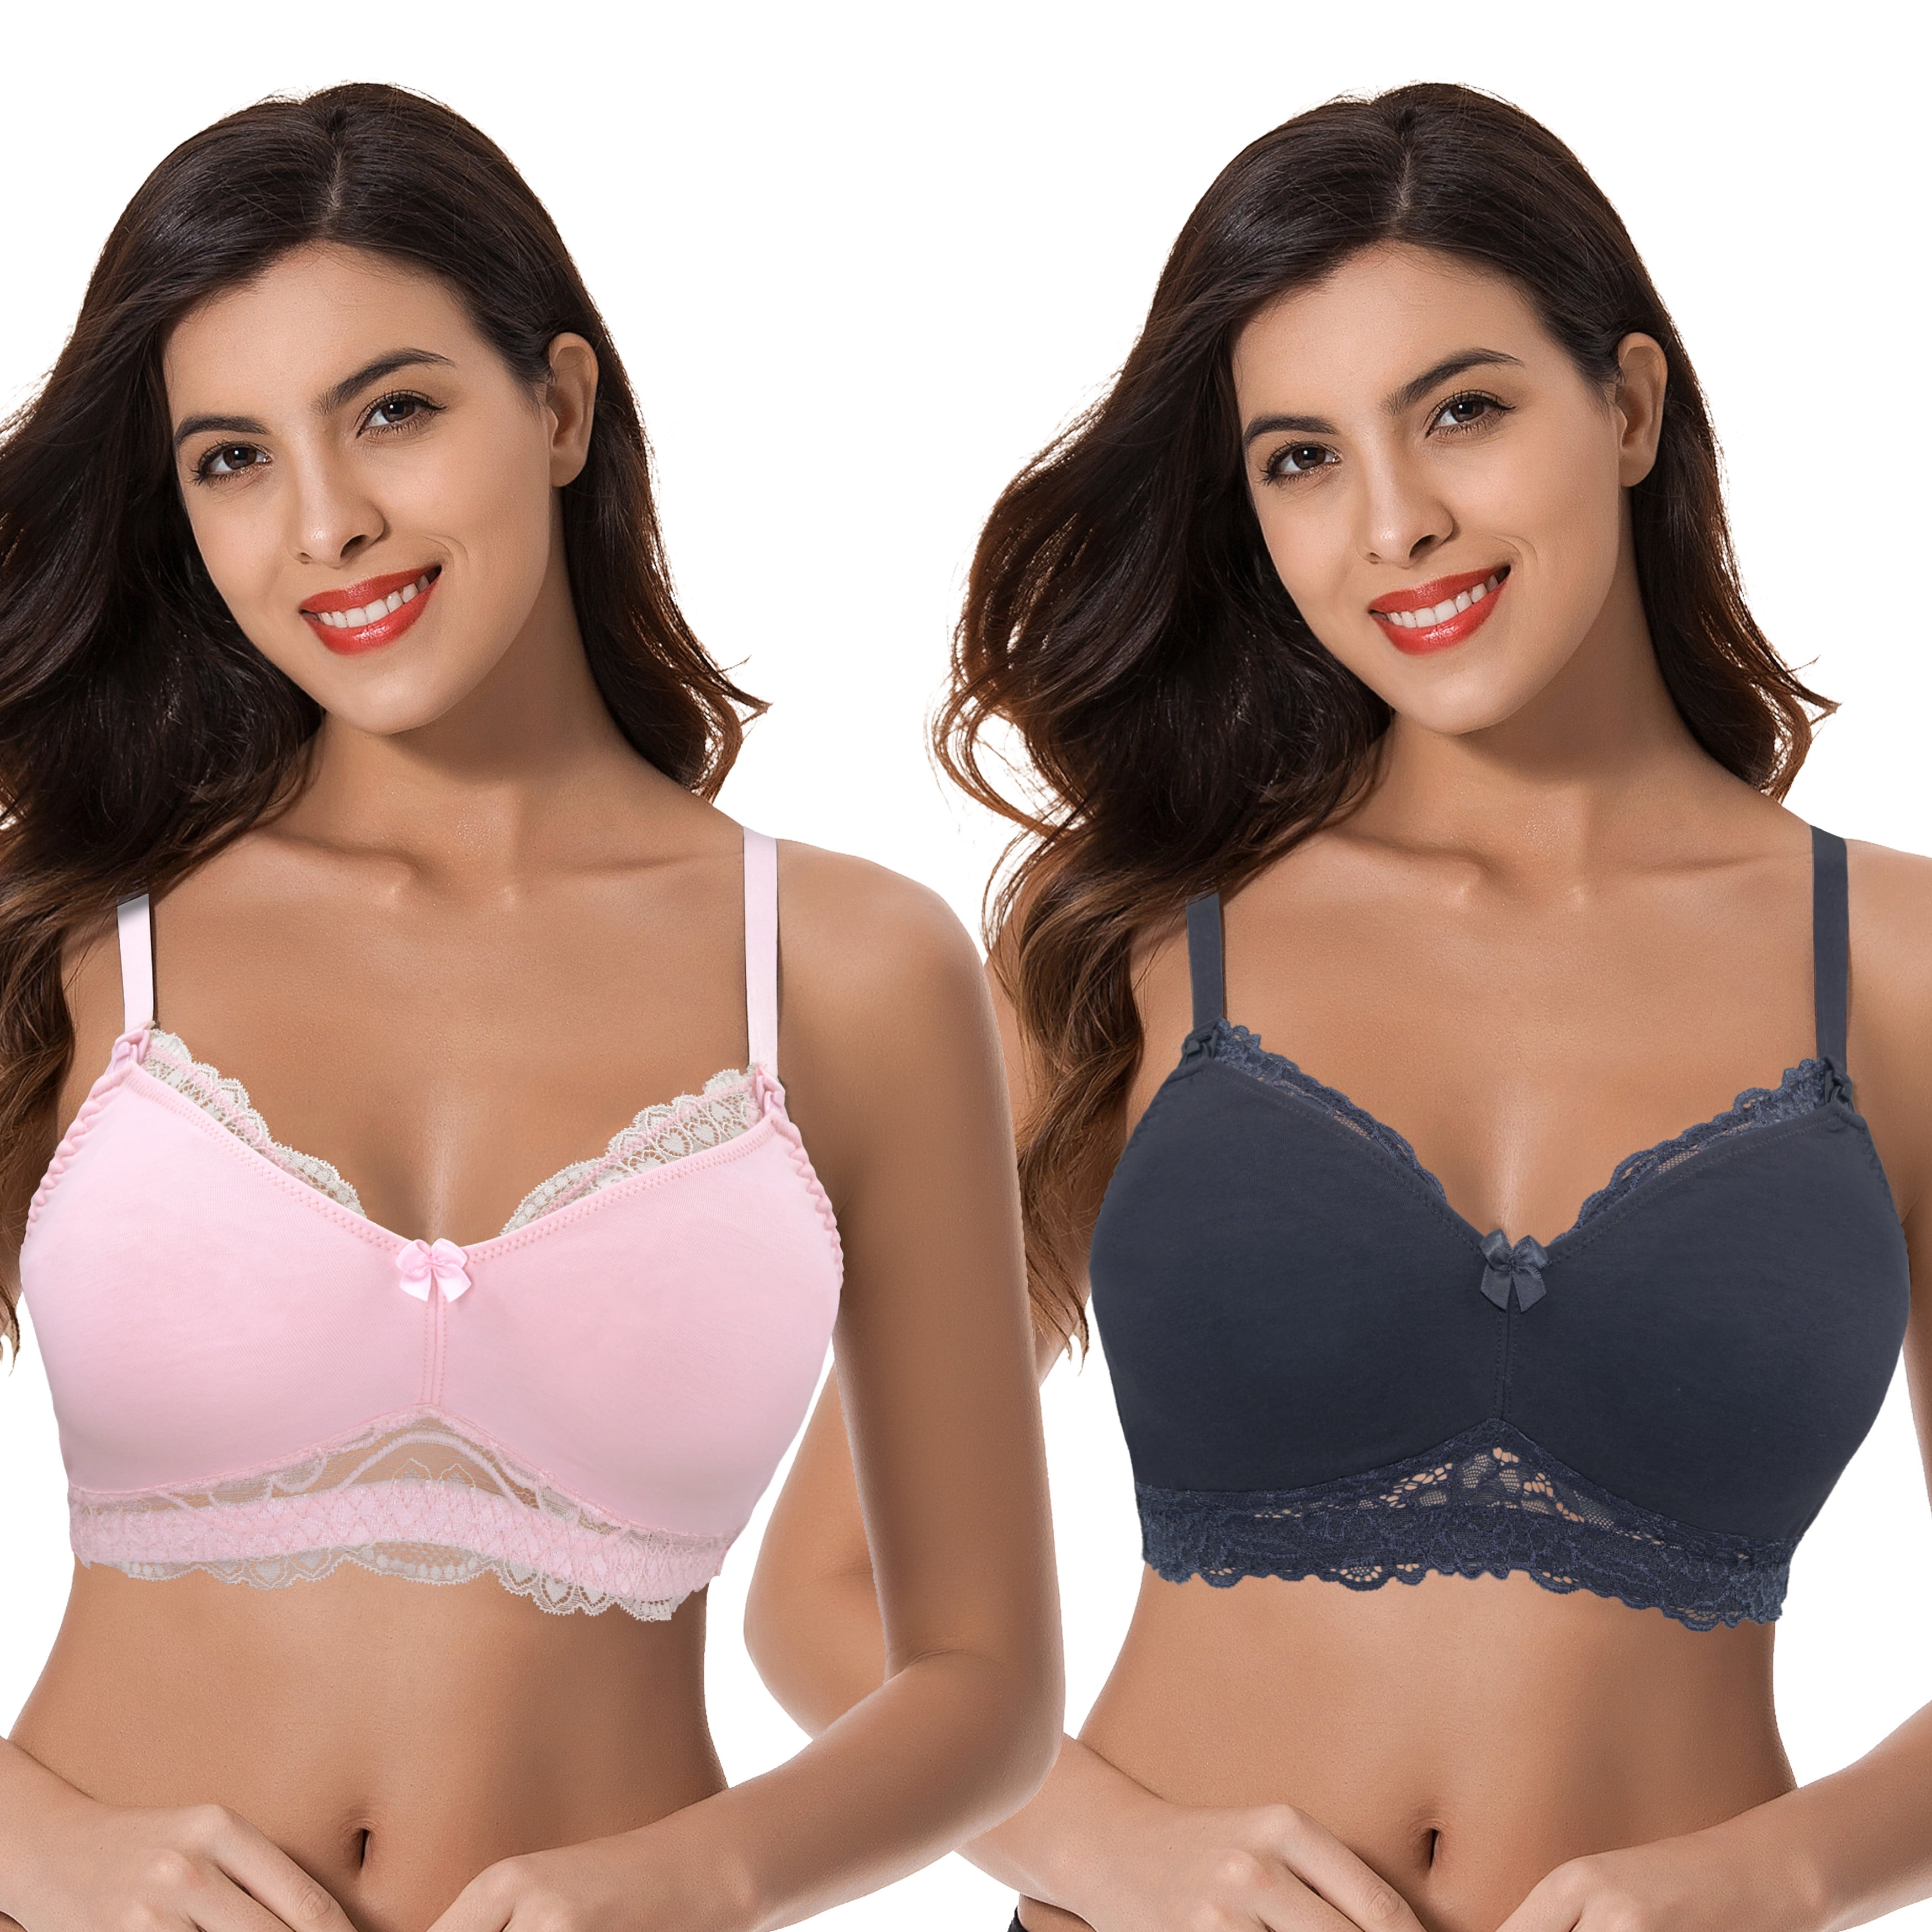 Curve Muse Plus Size Unlined Underwire Lace Bra with Padded Shoulder Straps-2PK 